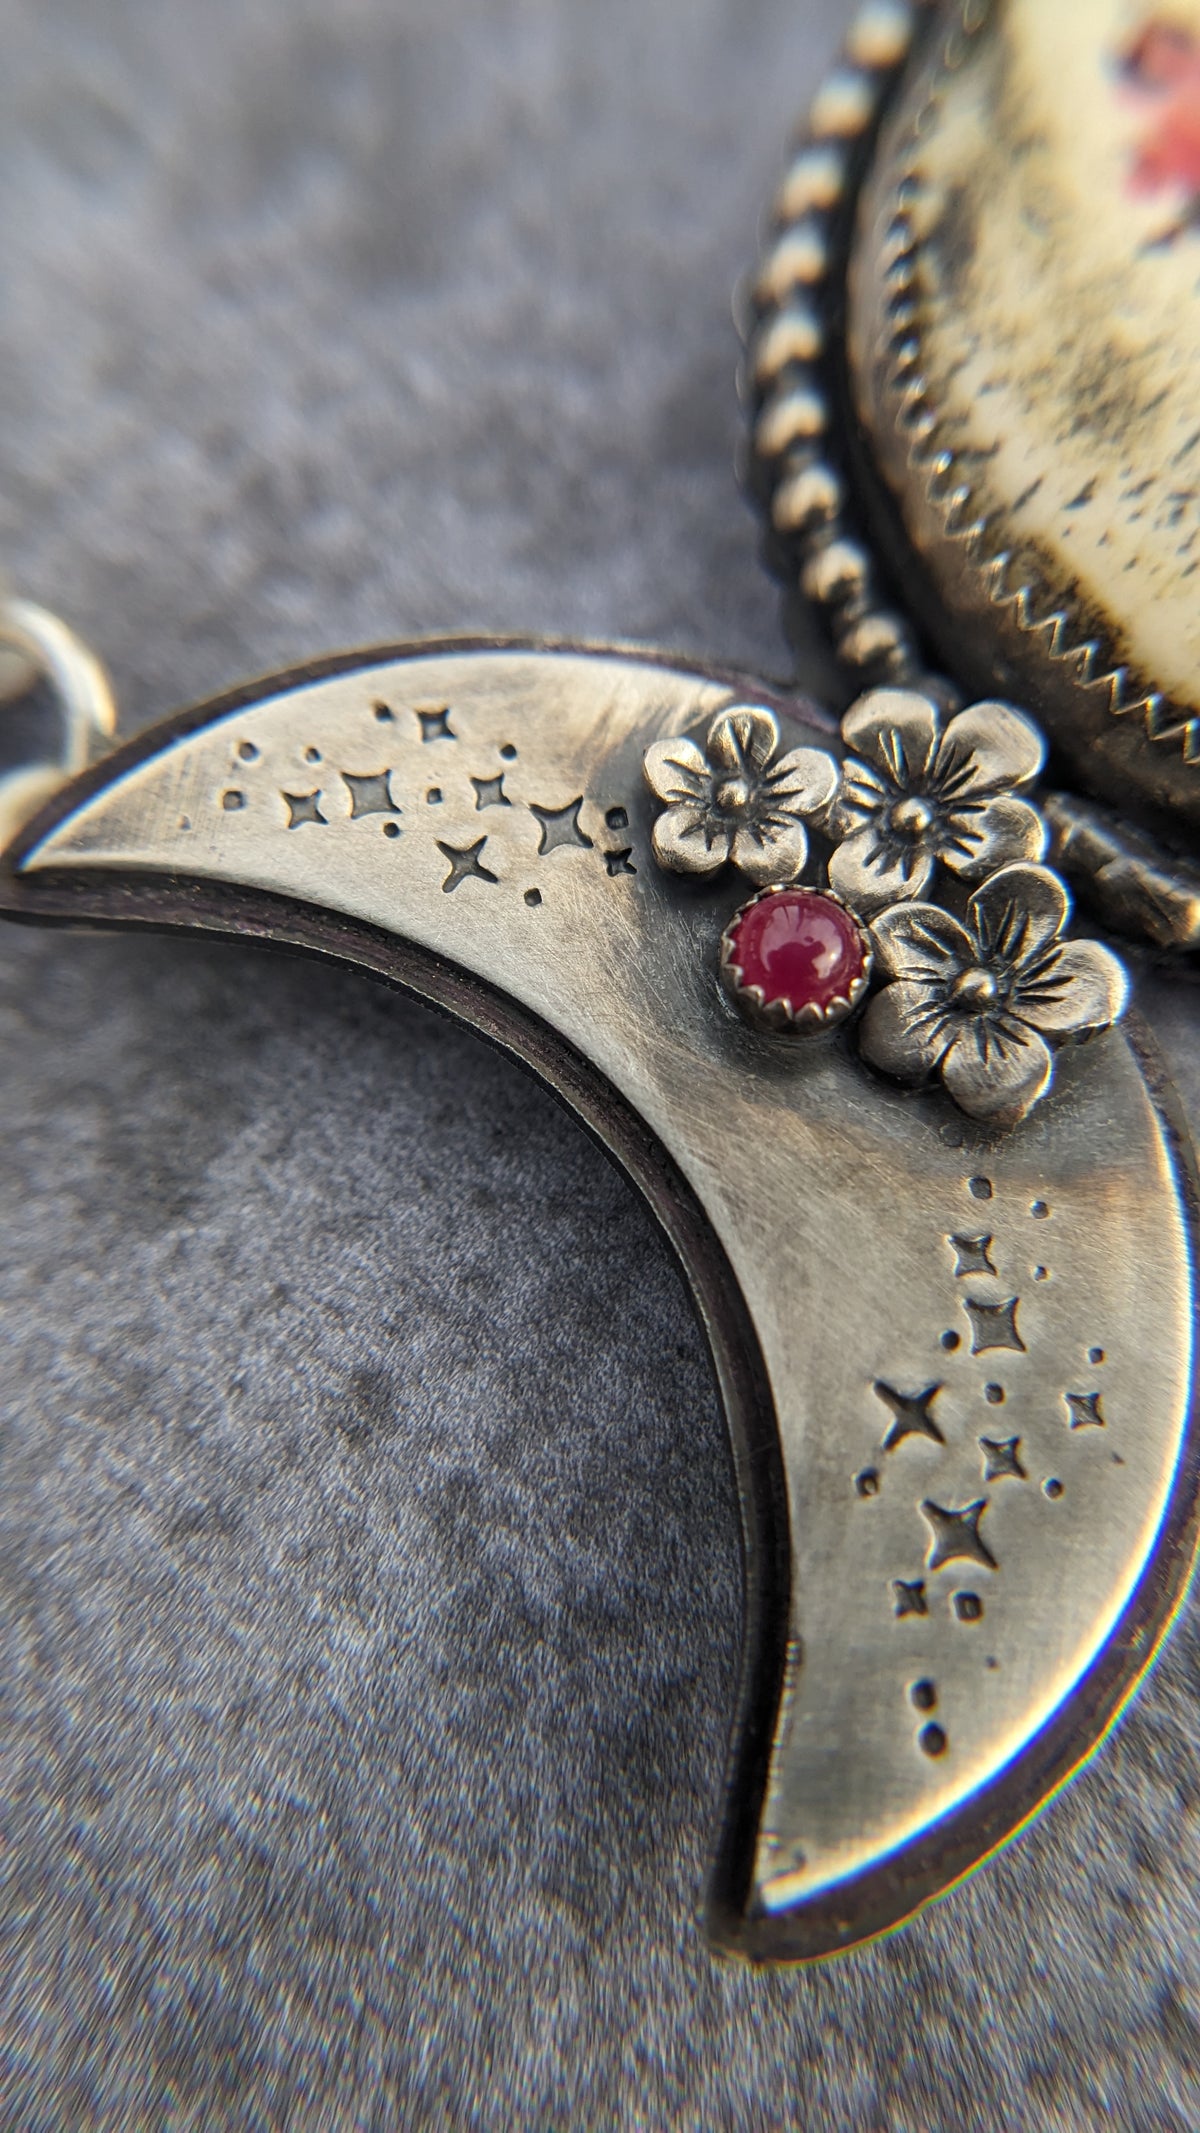 Triple Moon Goddess Necklace with Flowers and Rubies